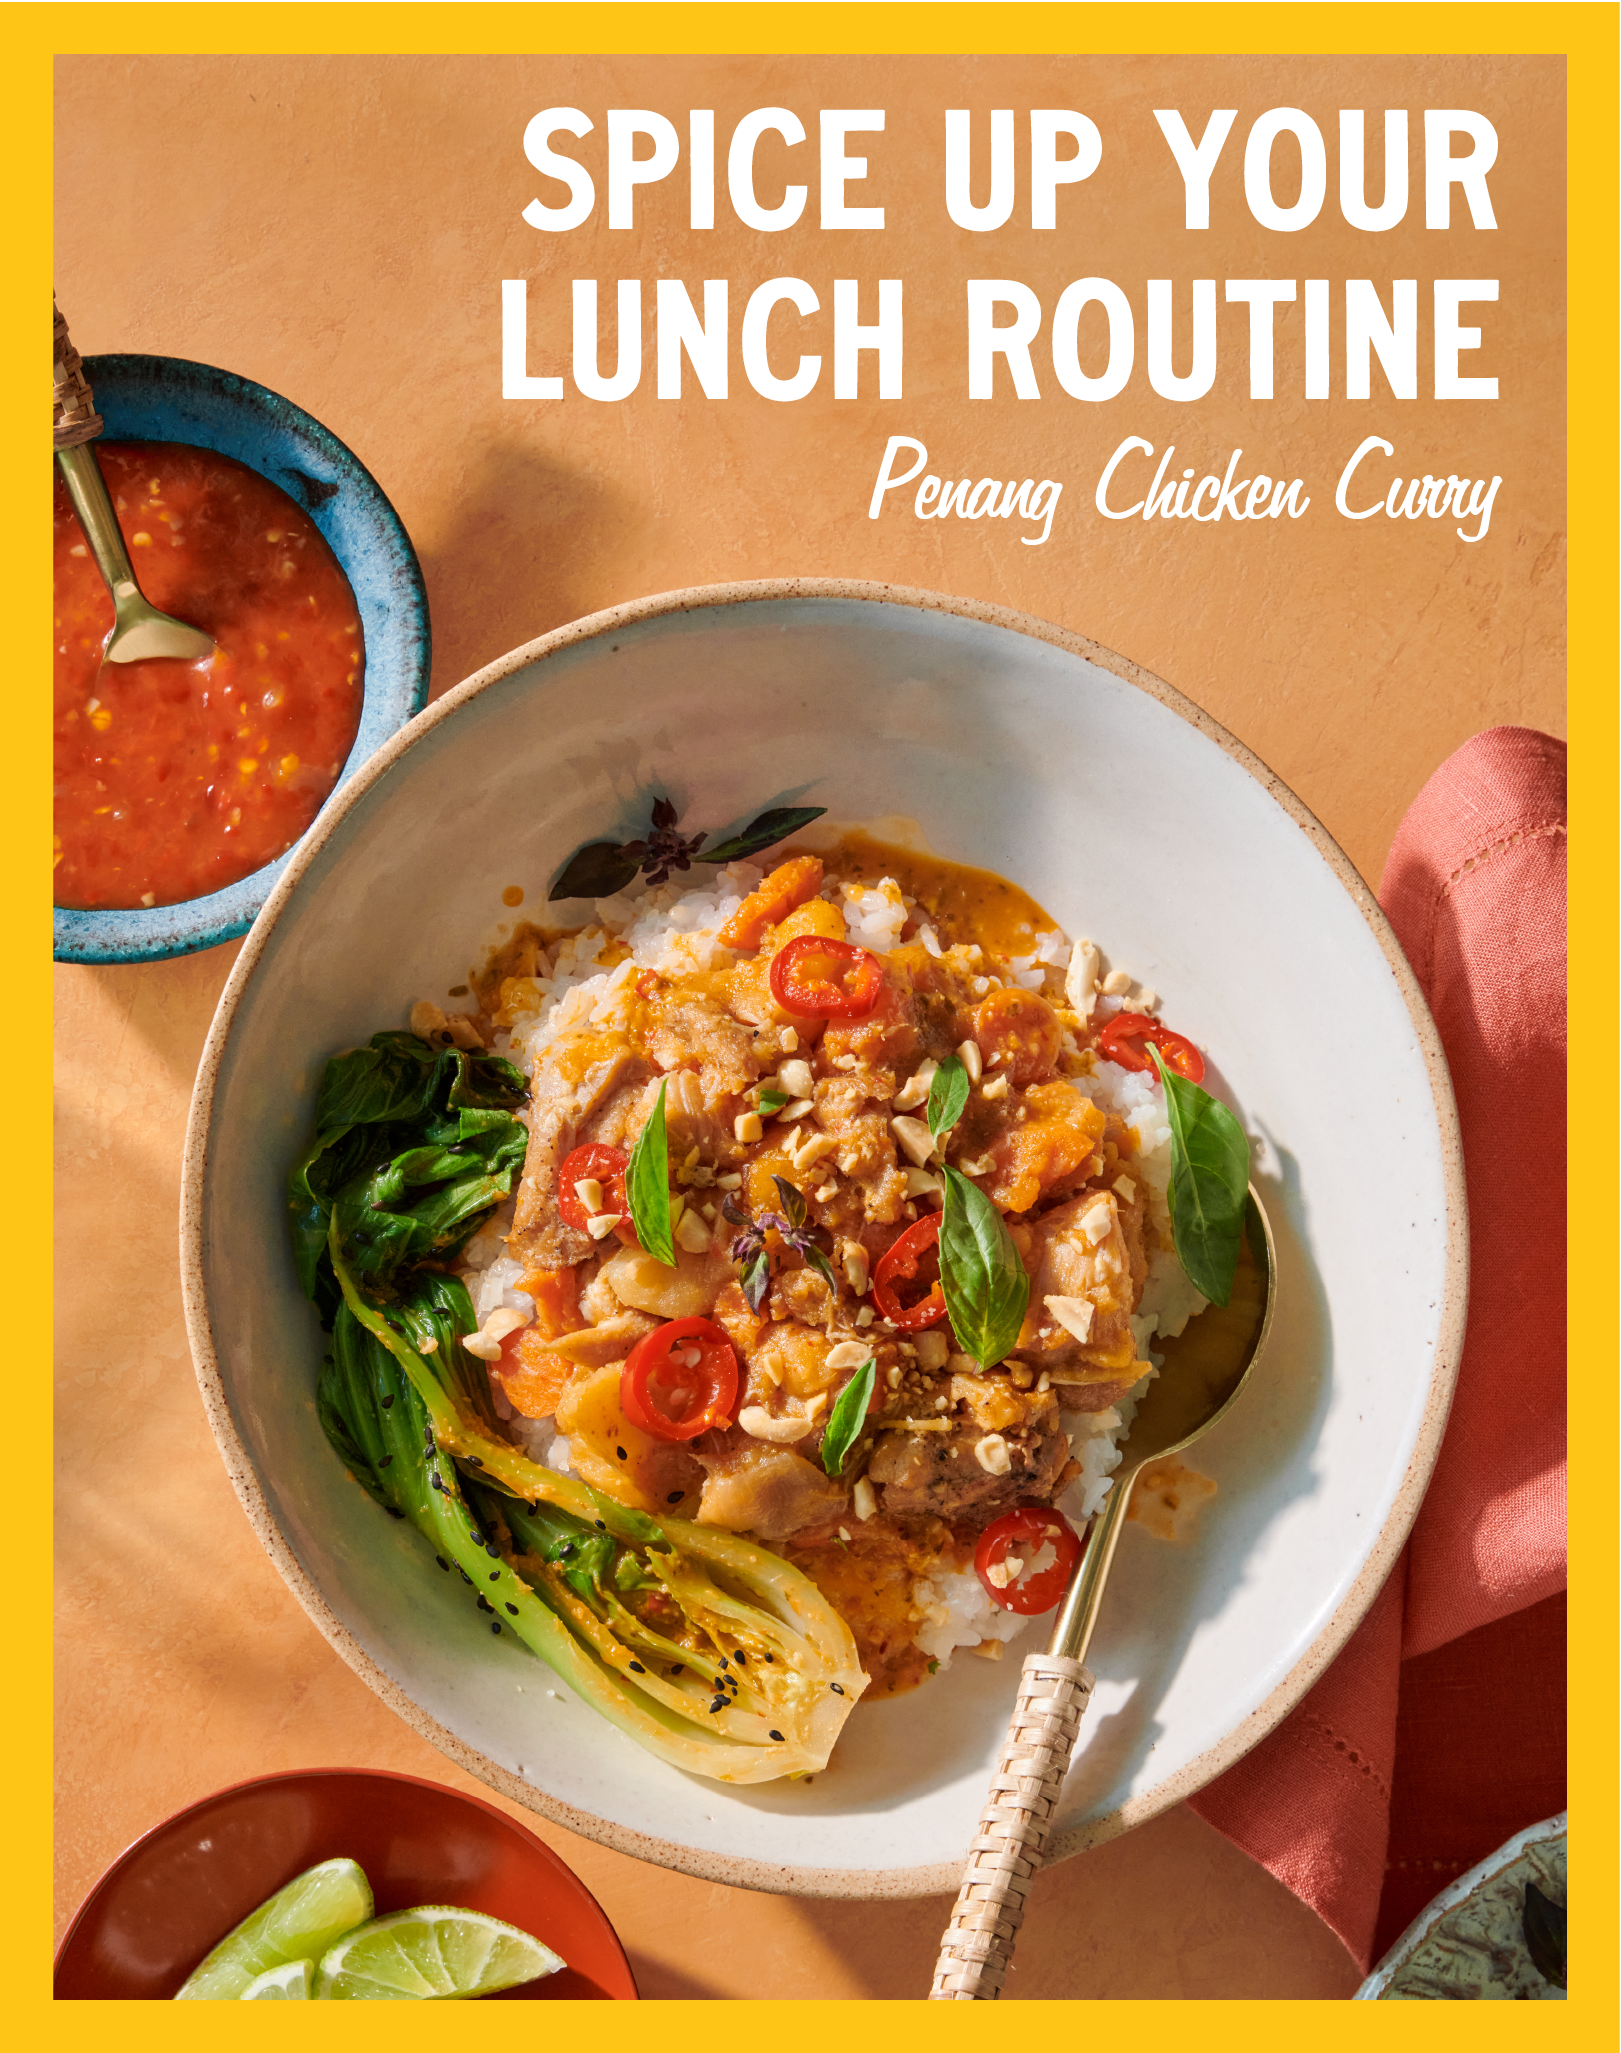 Penang Chicken Curry A-Frame